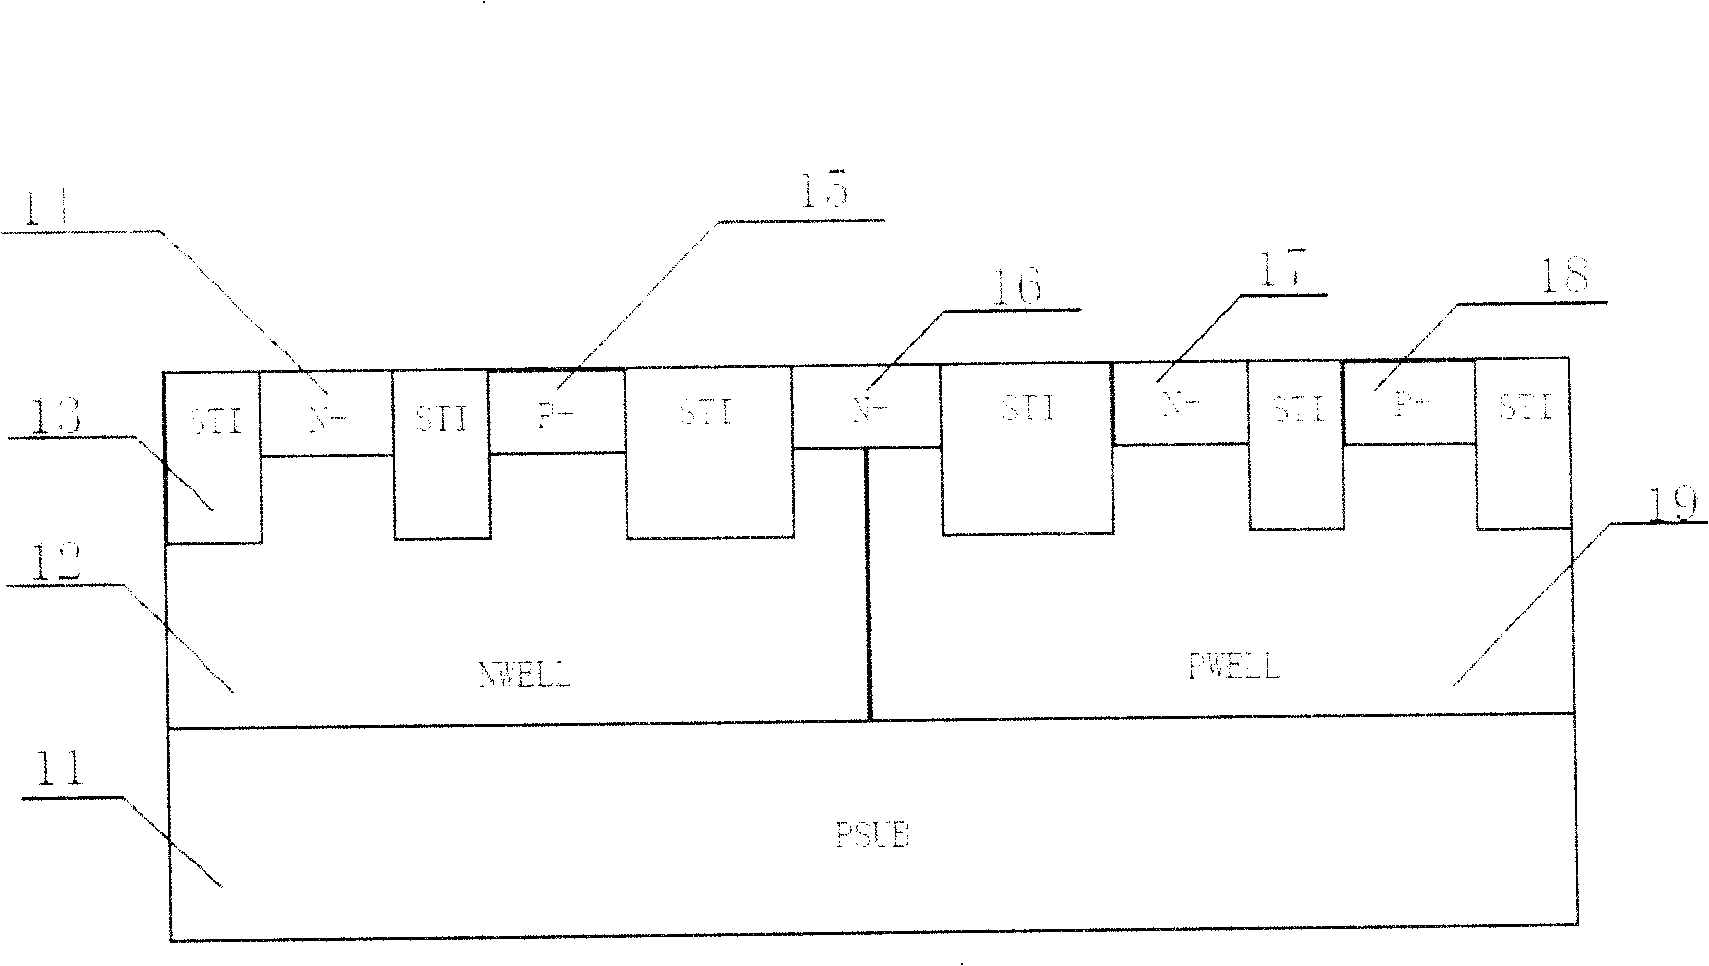 Grid-shaped electrostatic discharge protection device